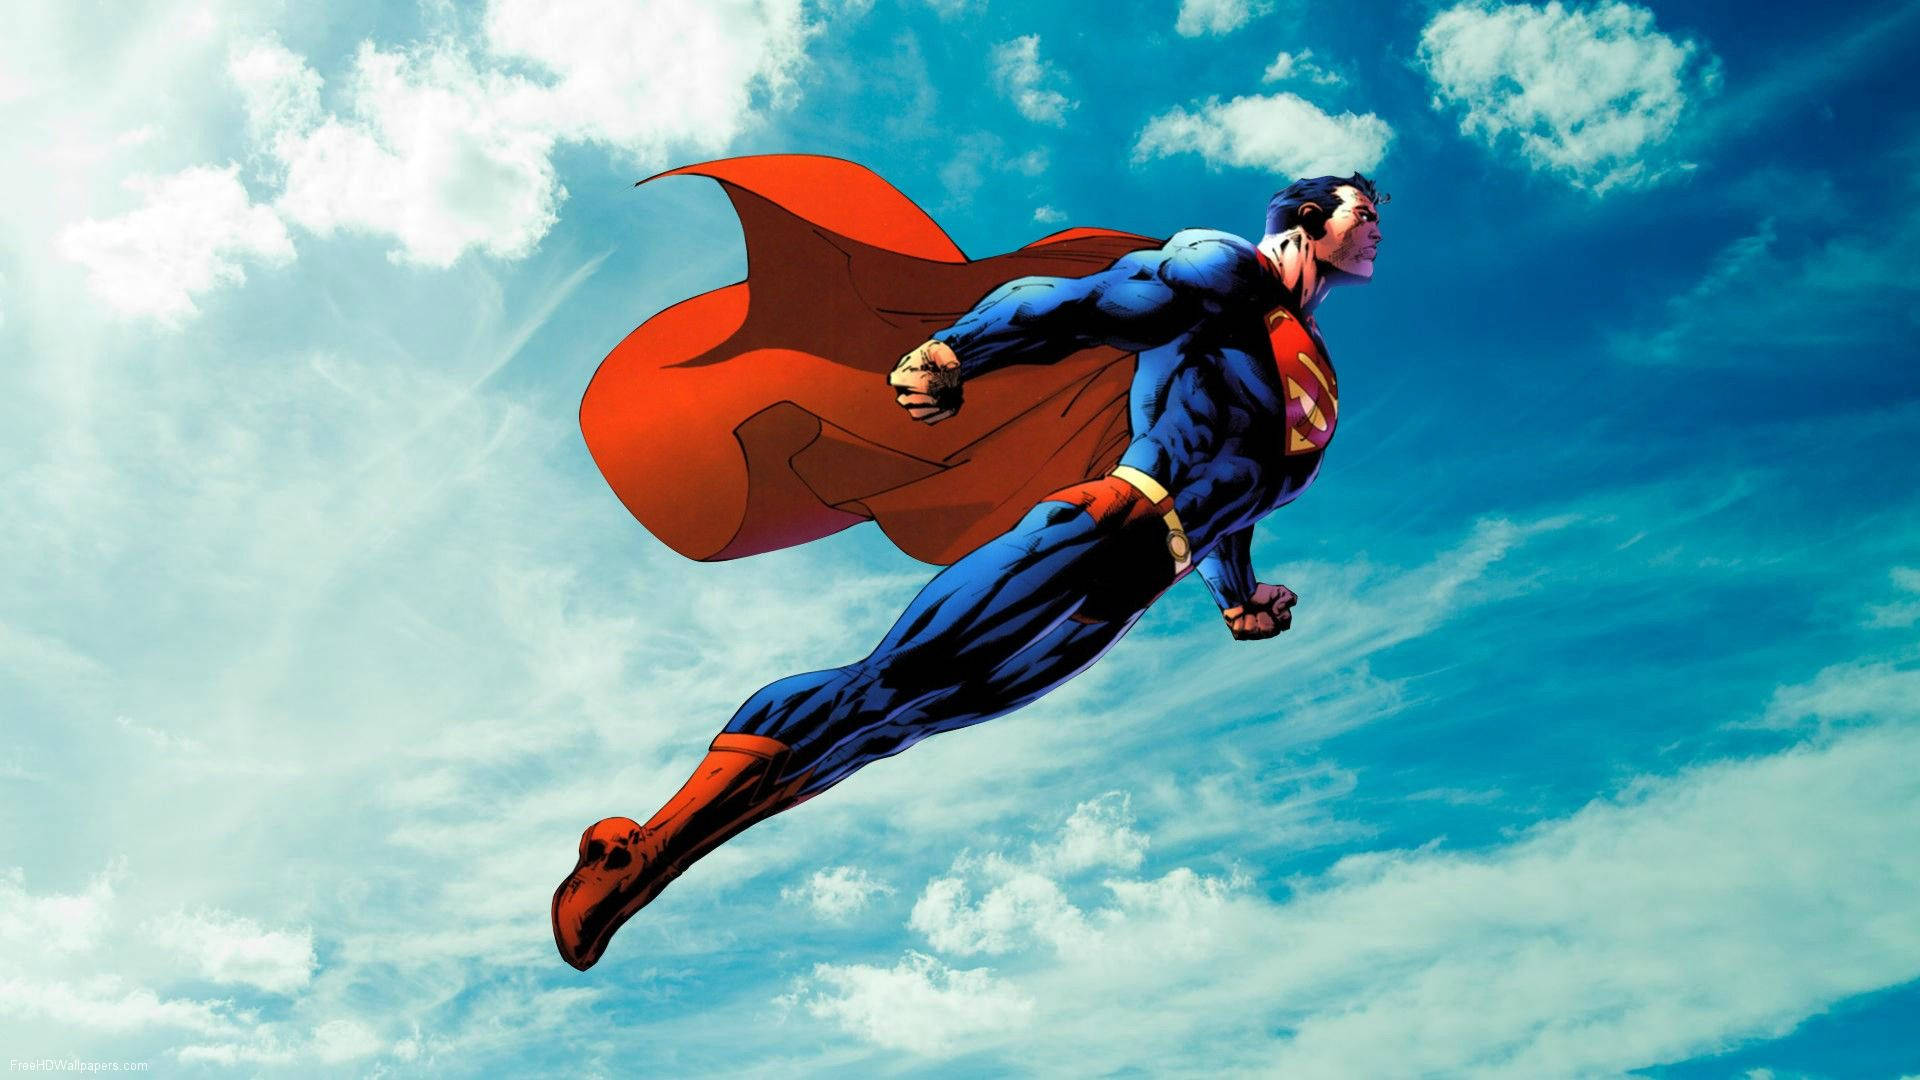 1920X1080 Superman Wallpaper and Background